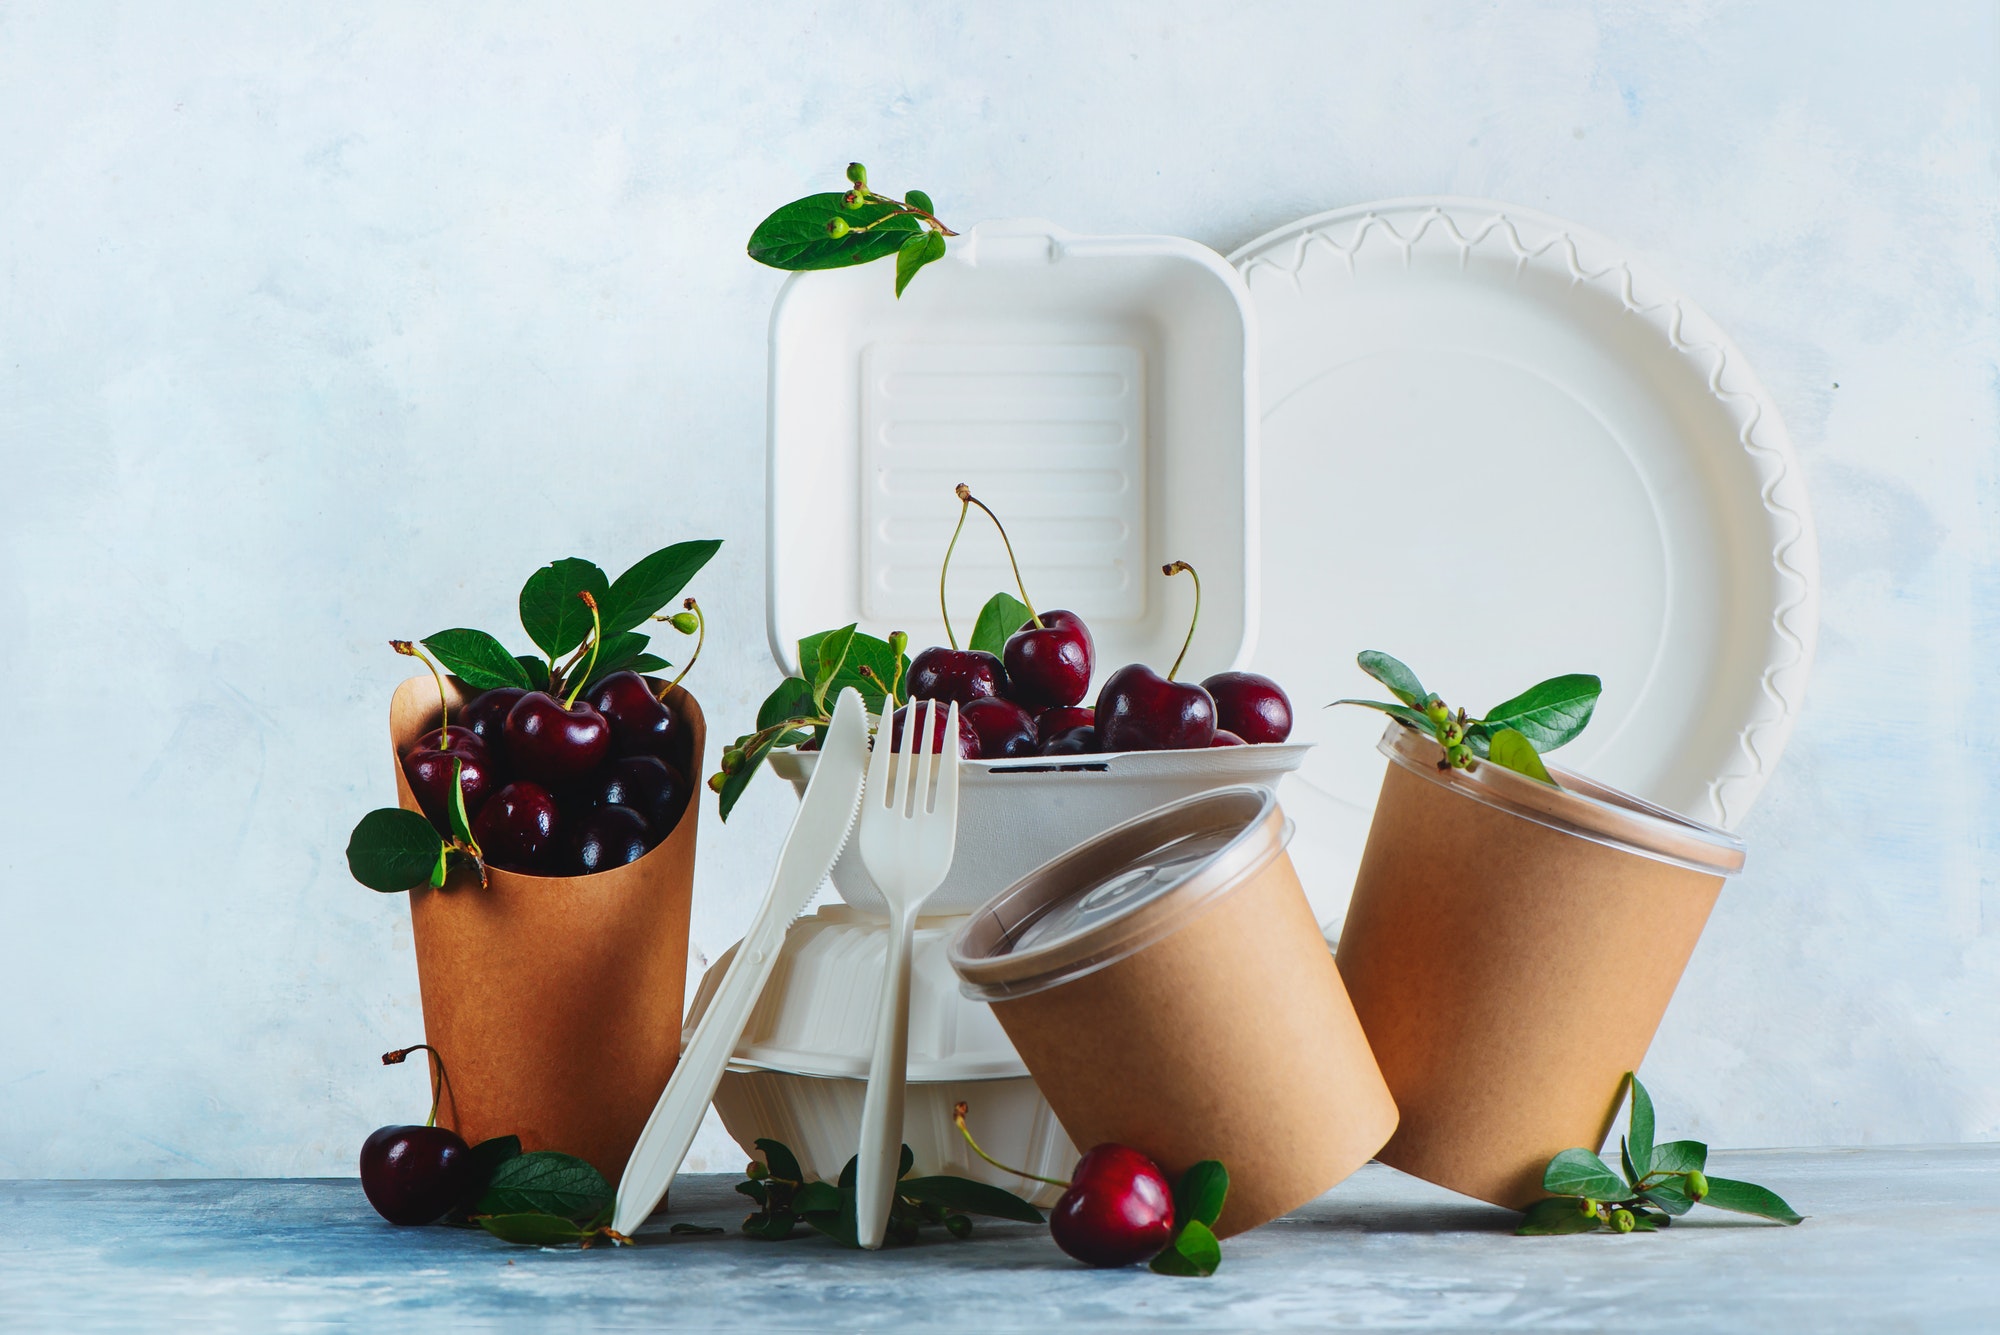 Catering disposables, cups, plates and containers with cherries. Eco-friendly food packaging on a